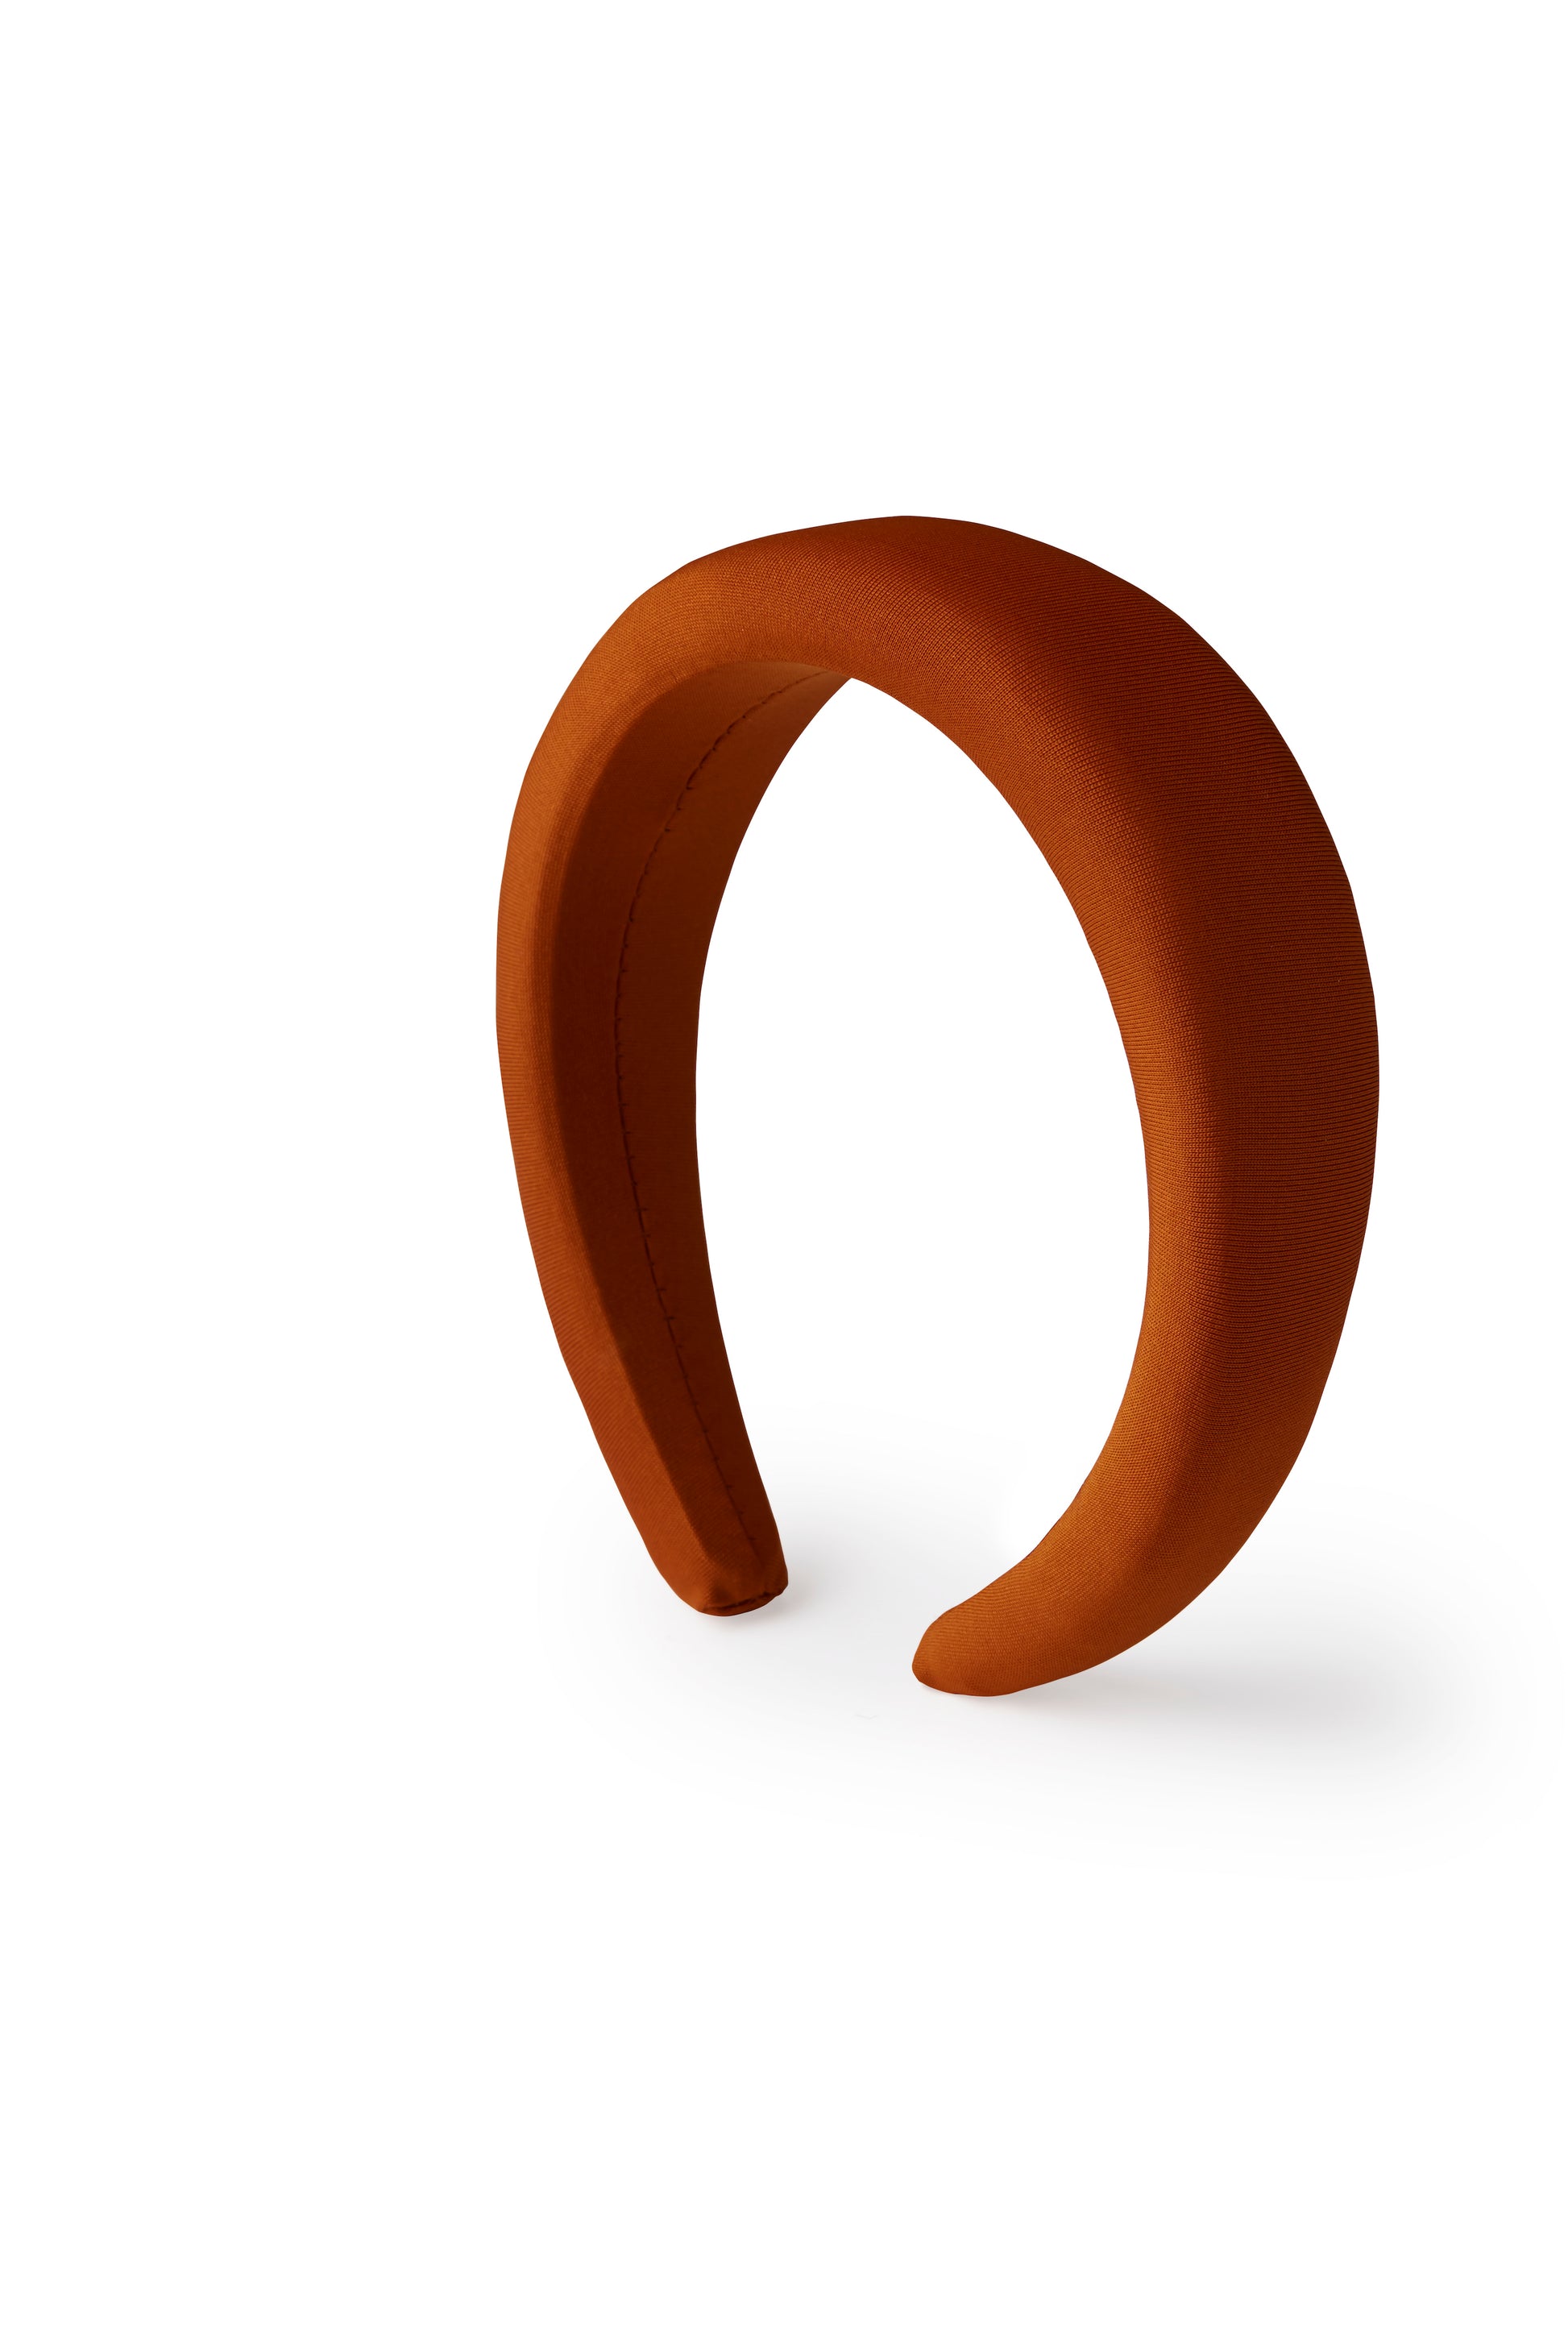 Padded hairband in copper color